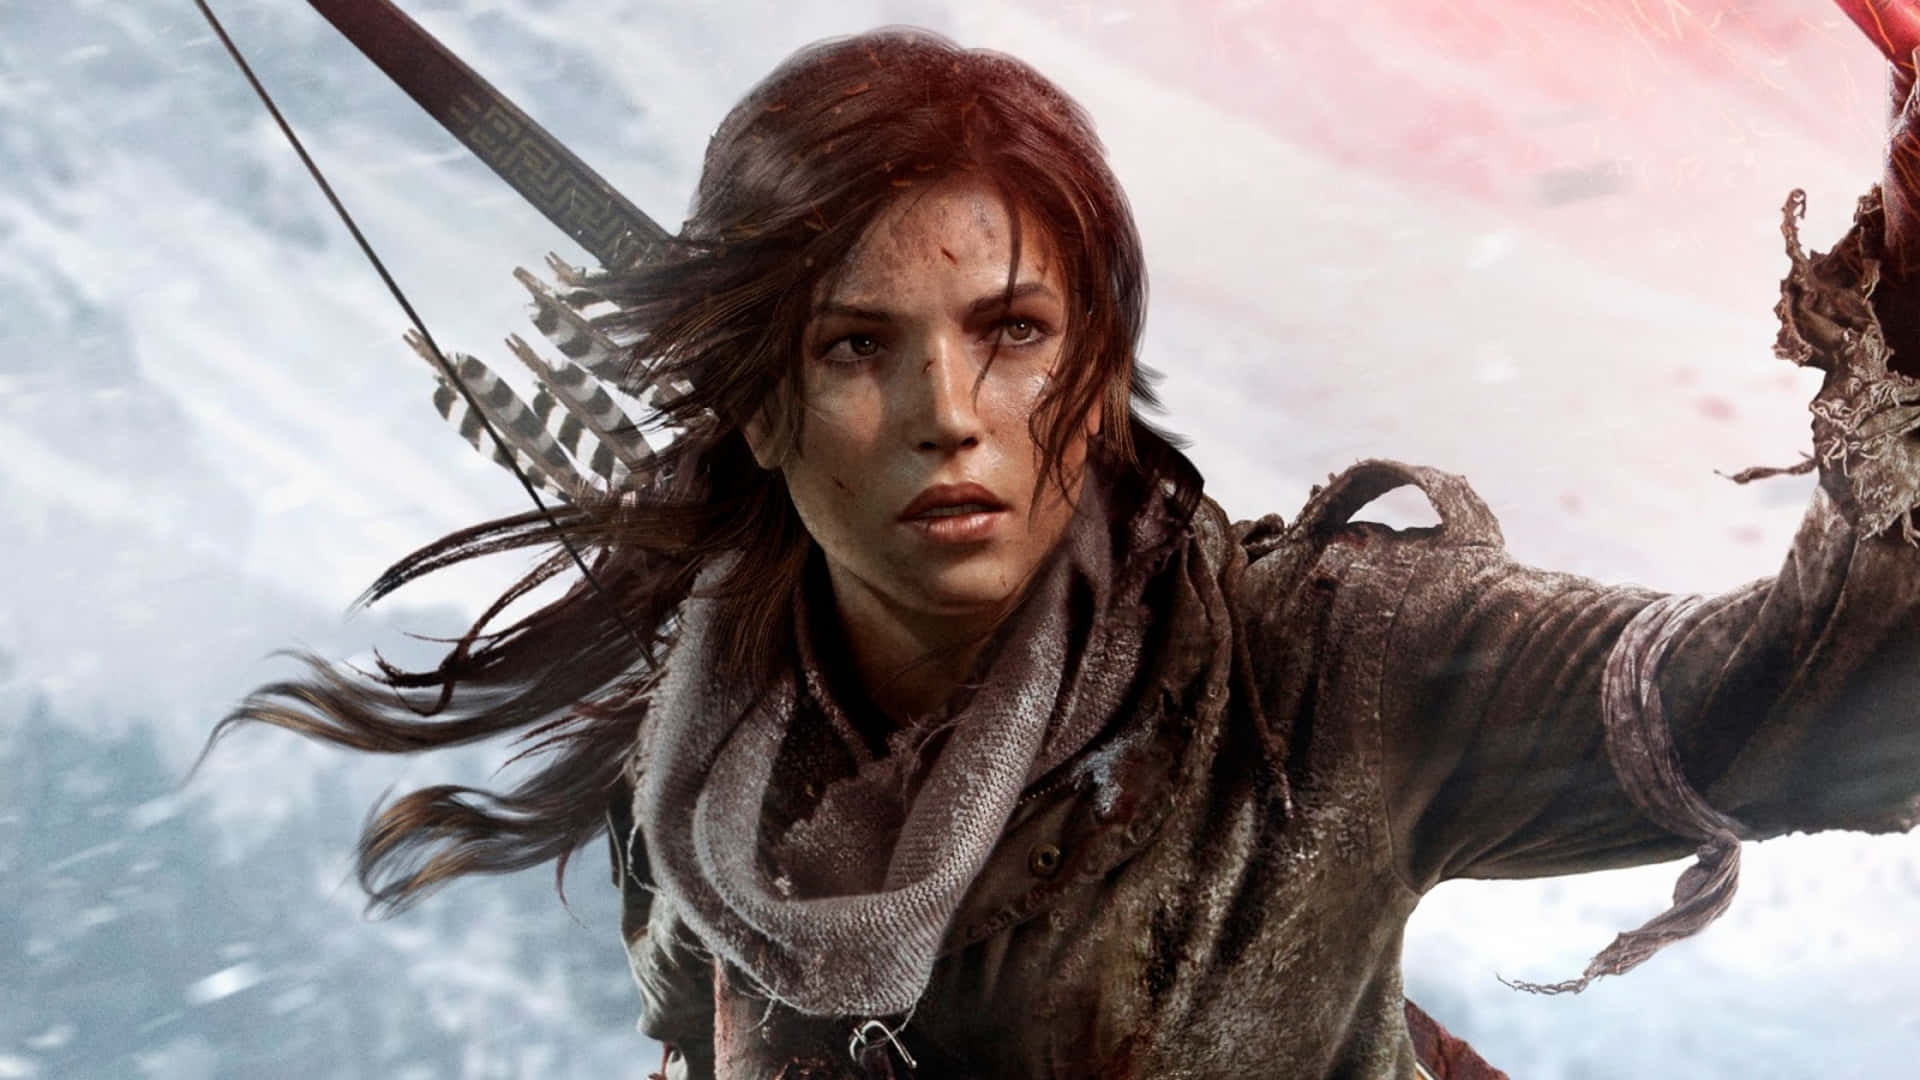 Break into the ancient world of rise of the tomb raider